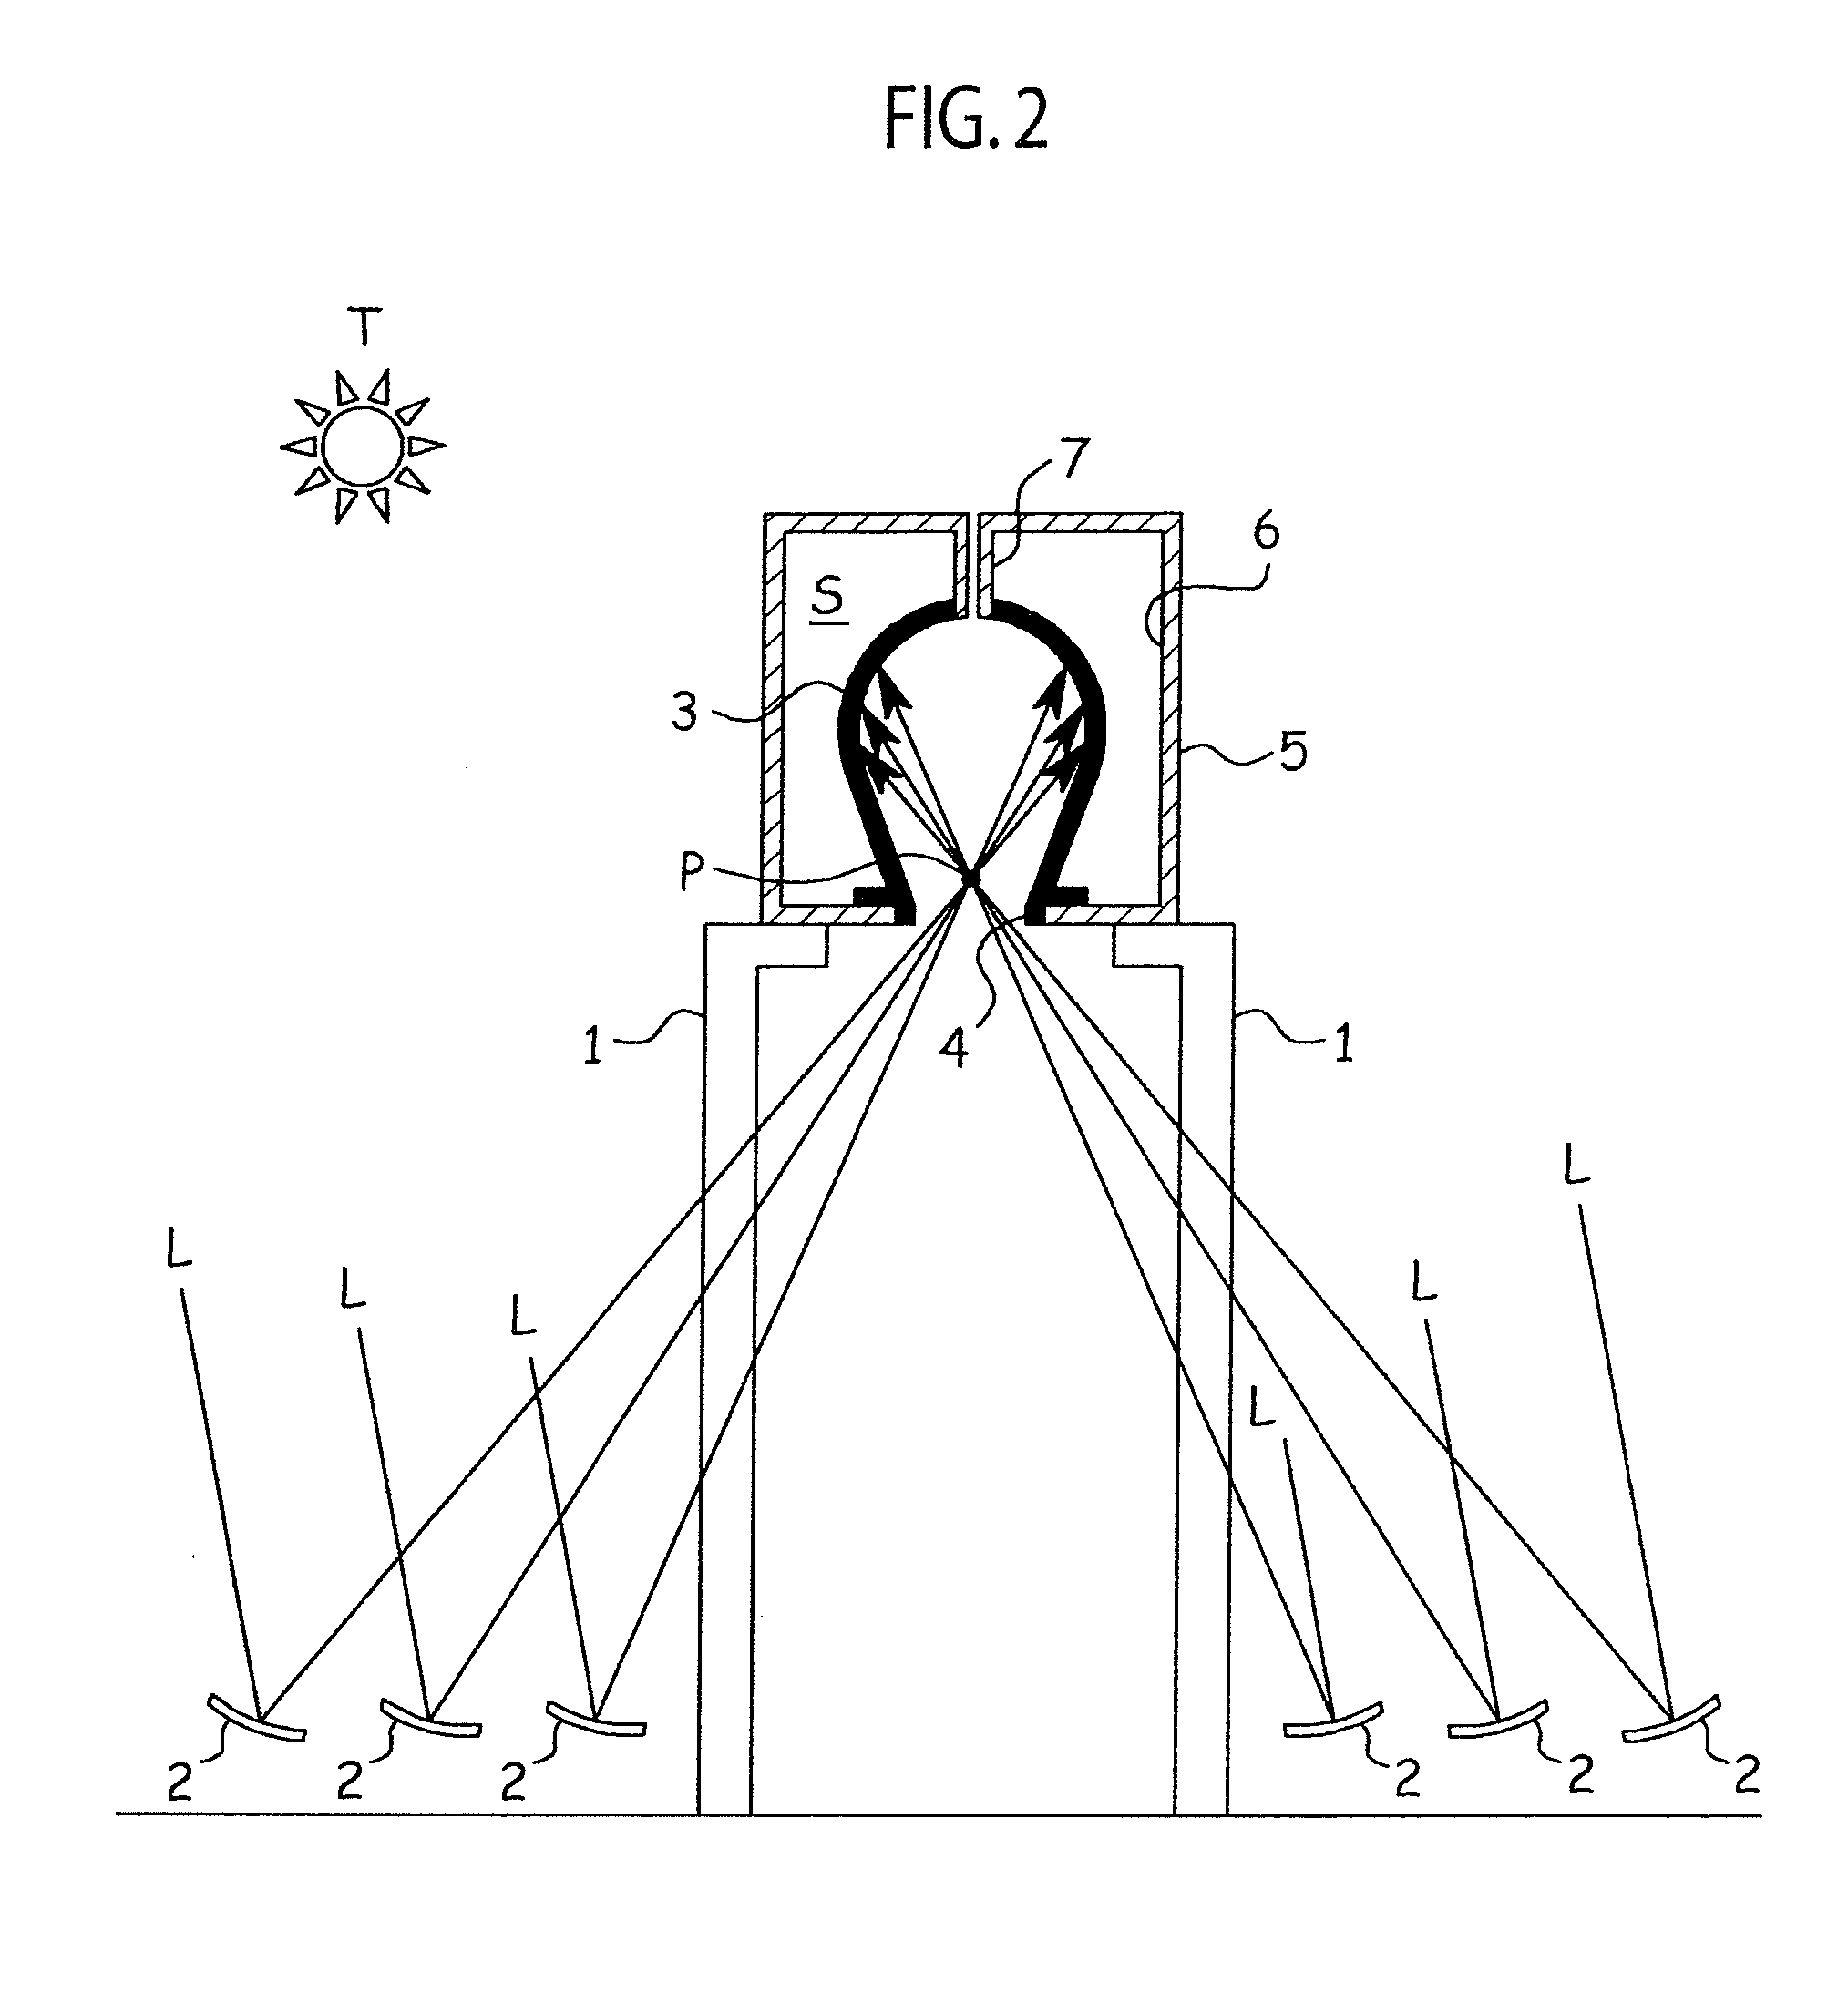 Solar power concentrating system